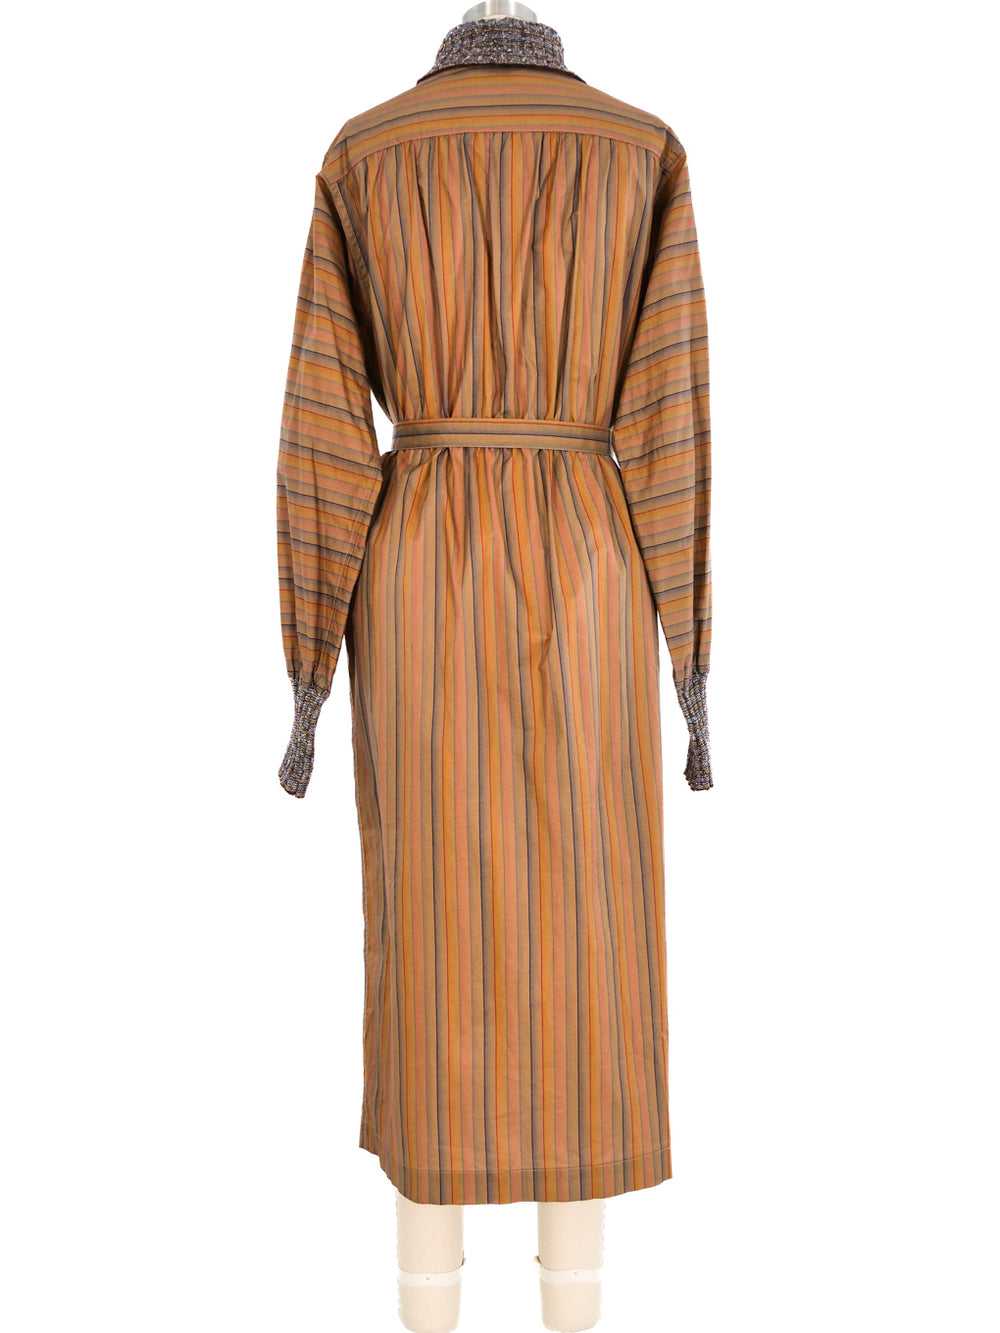 1970's Missoni Striped Belted Coat - image 4